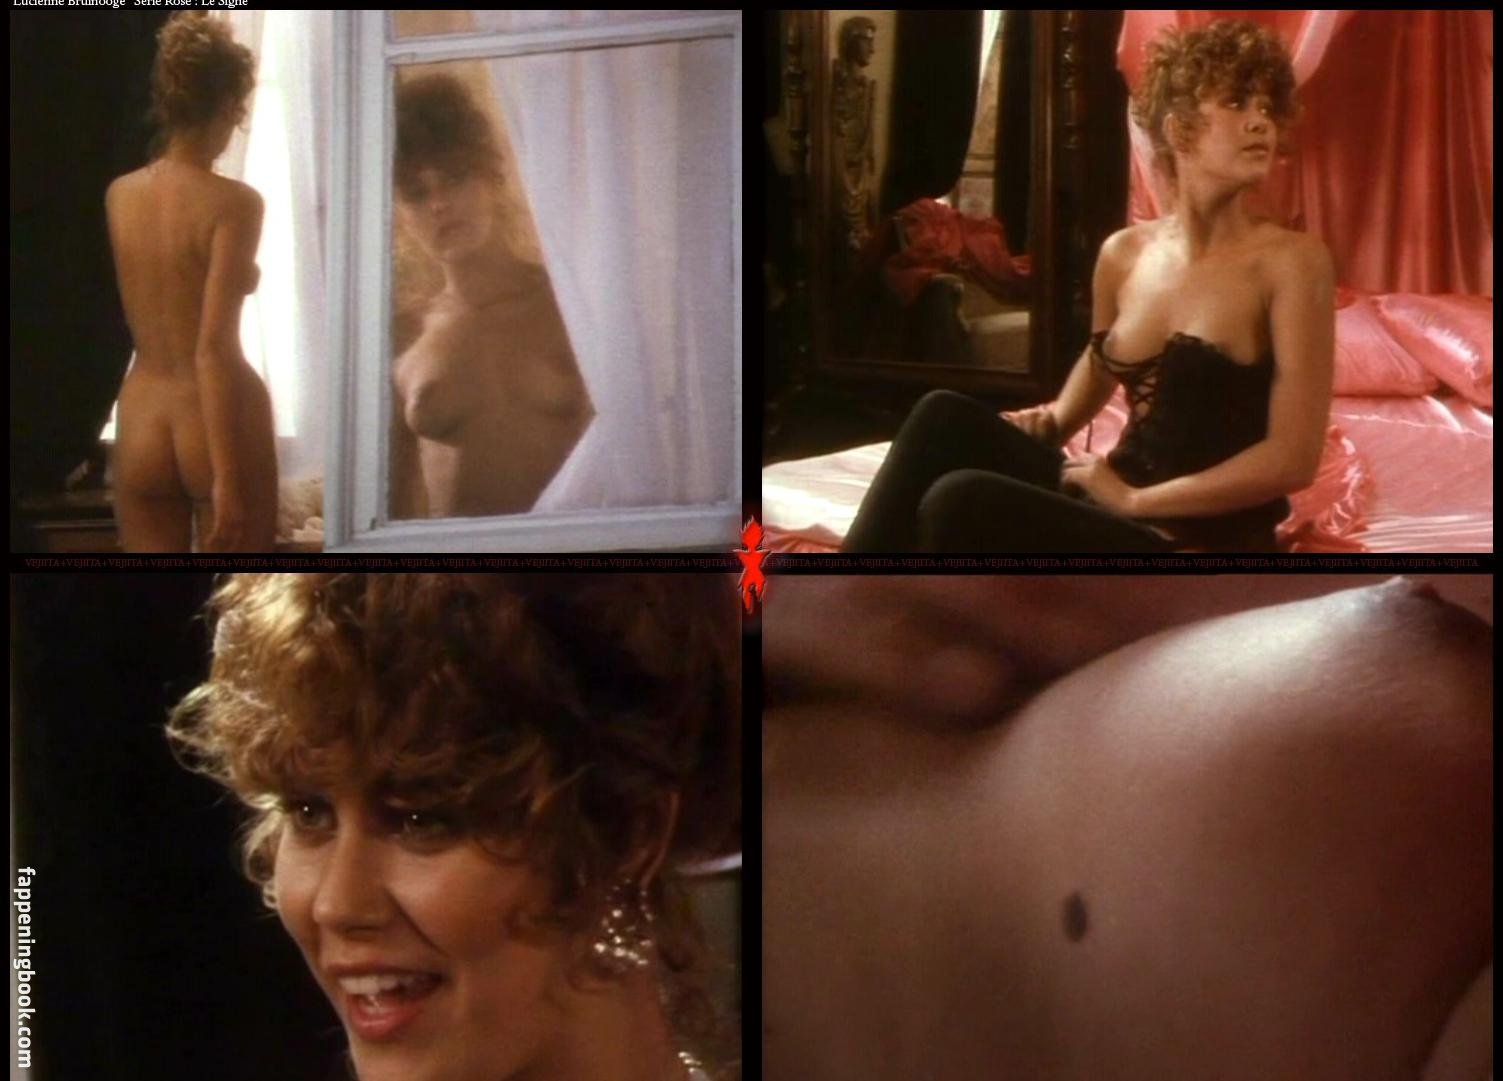 Nude Roles in Movies: Série rose (1986-1991). 